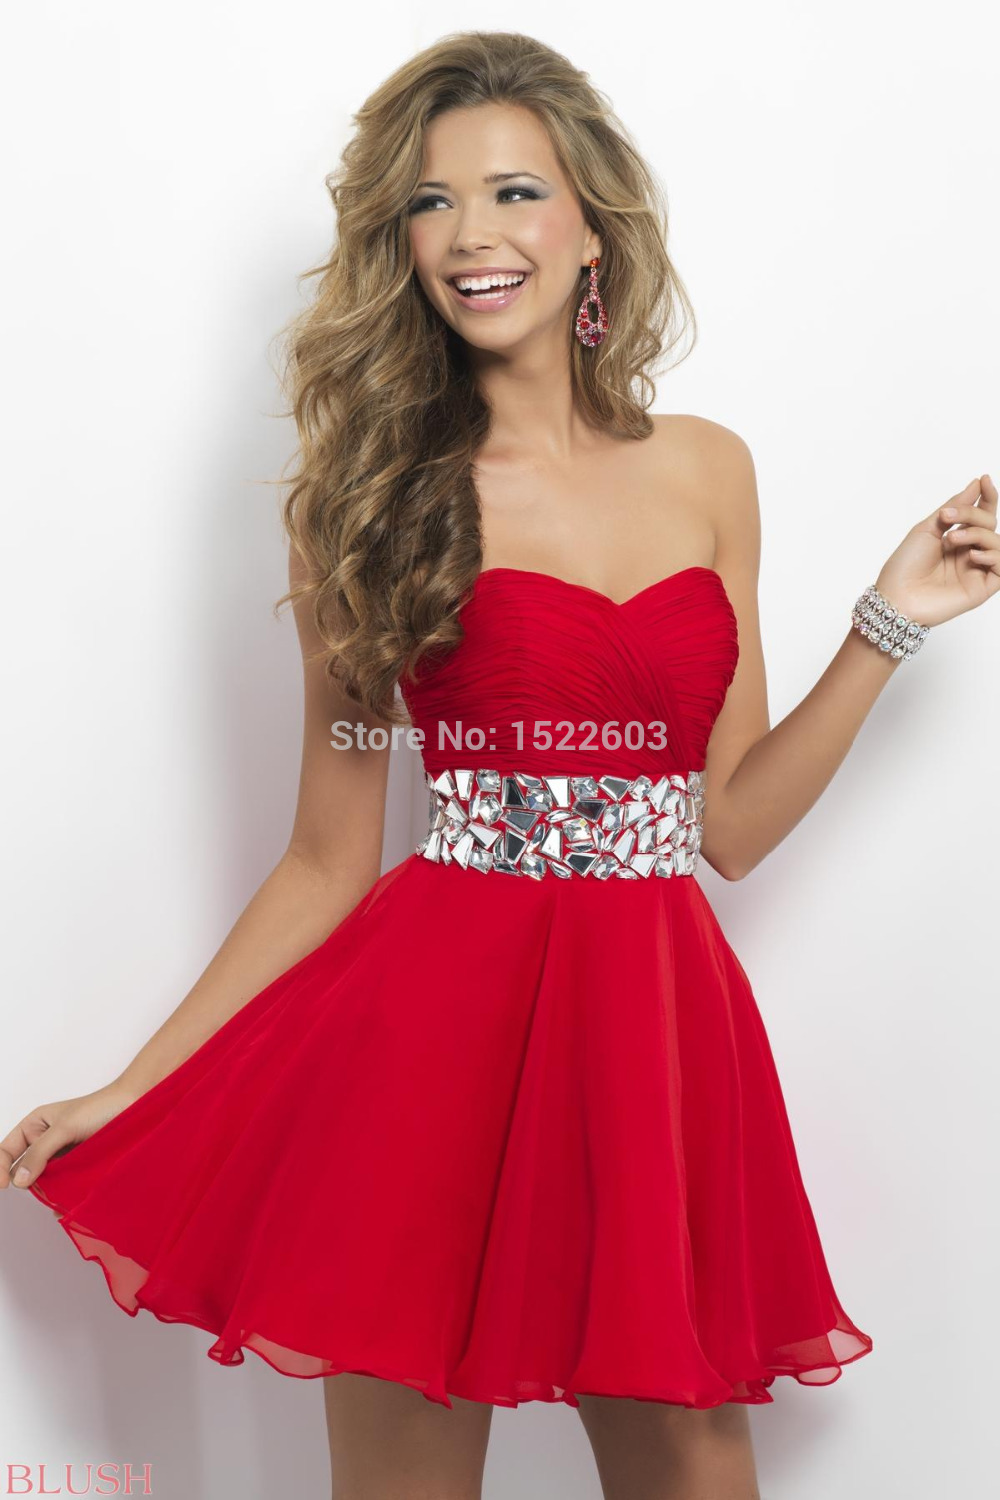 ... Short-Prom-Dresses-2015-Sleeveless-Cocktail-Dress-With-Crystal-Fast